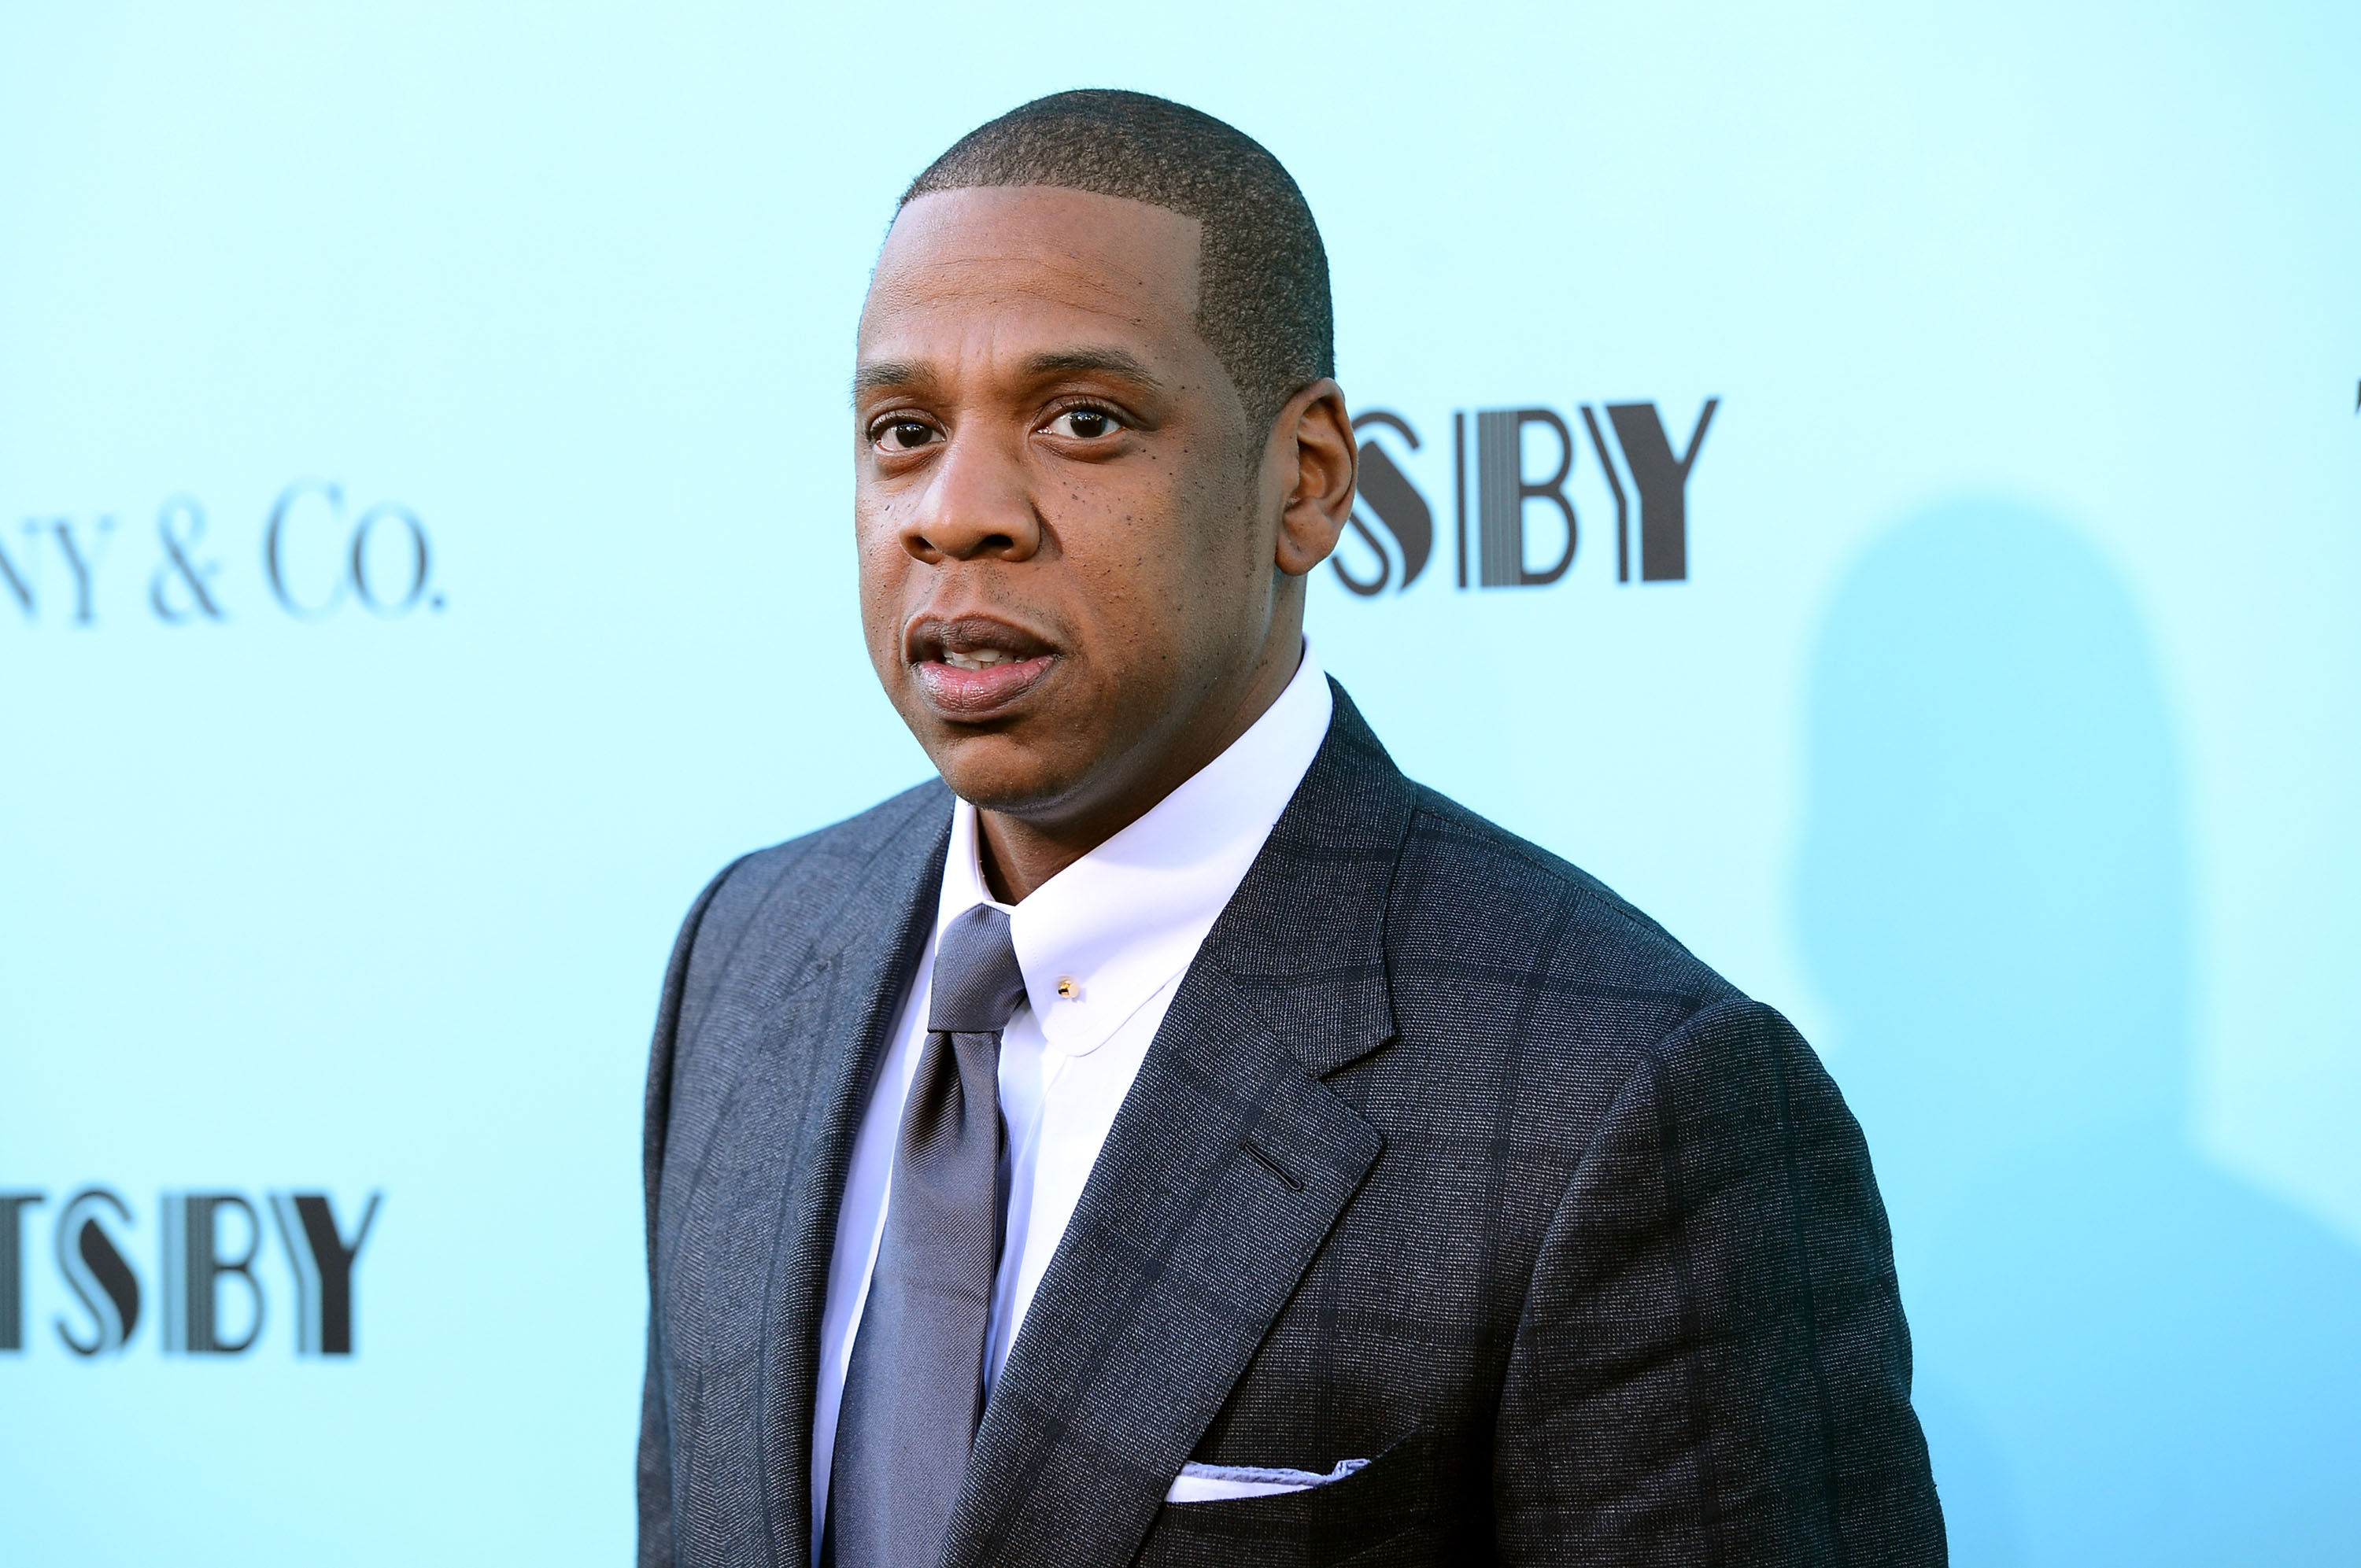 Jay Z Kendrick Lamar And Drake Are Rich As Hell Forbes Unveils Hip Hop List